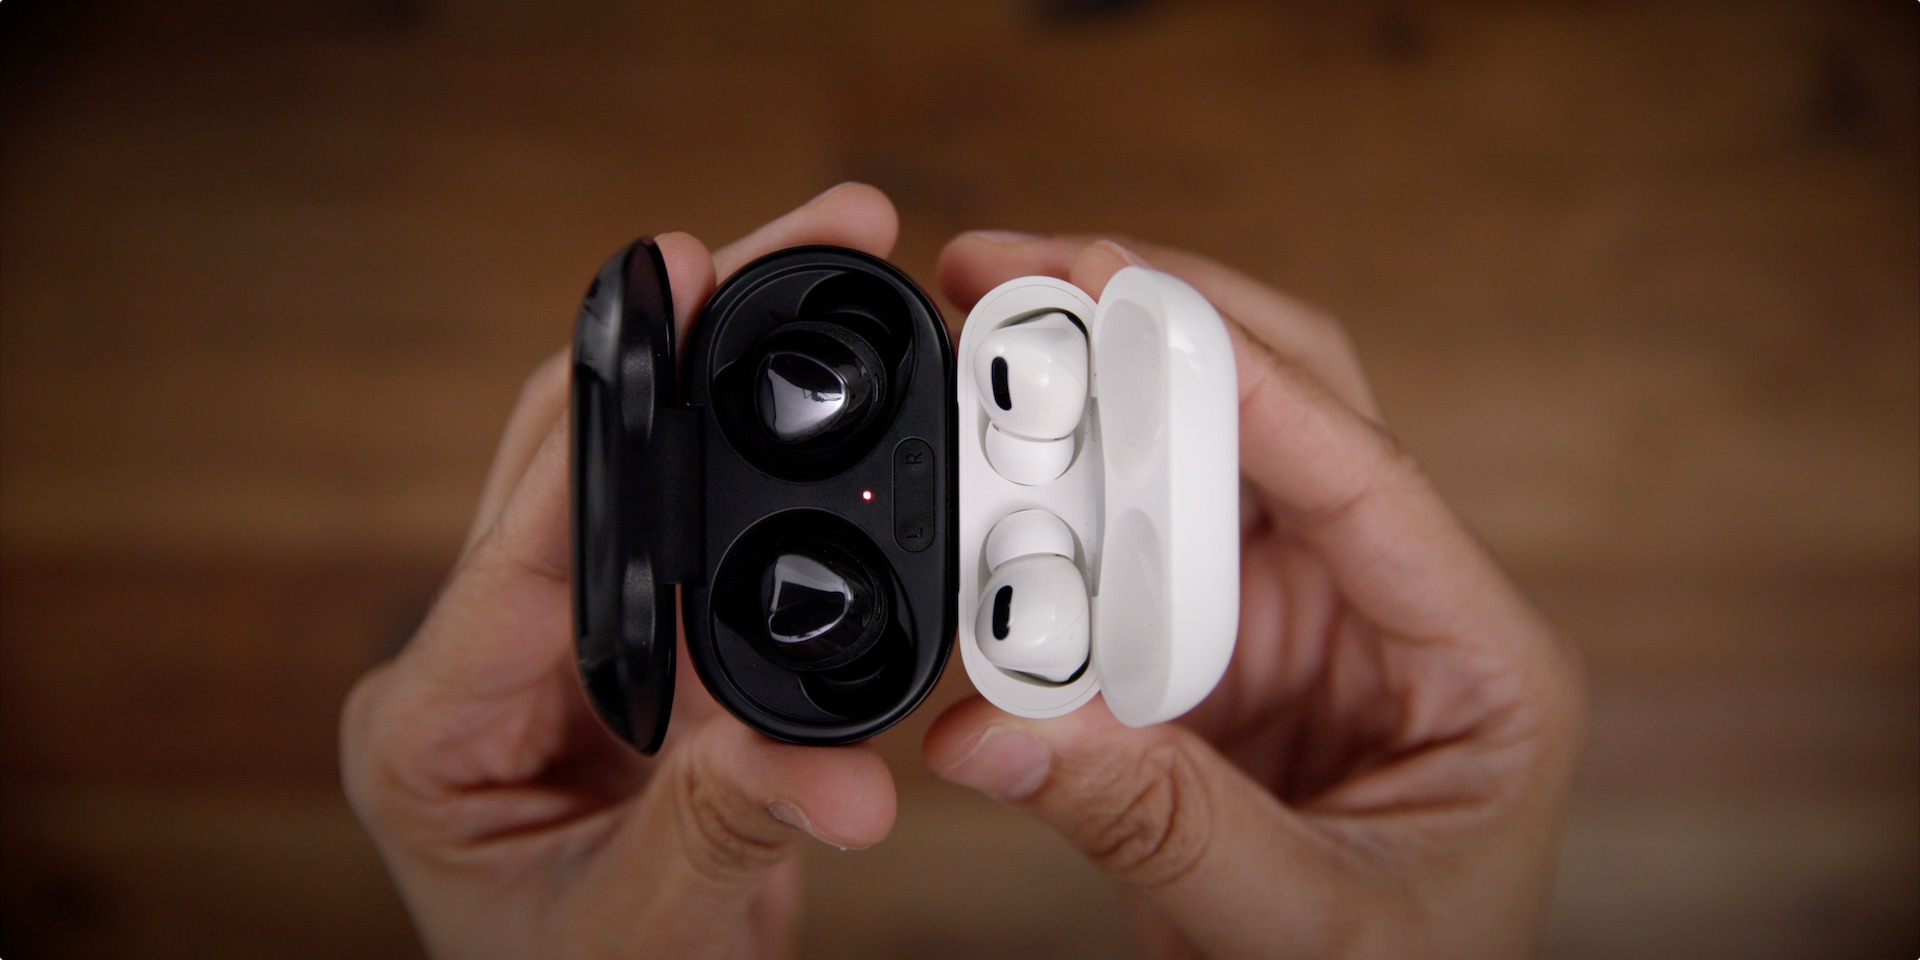 Samsung Galaxy Buds+ impressions from an AirPods Pro user [Video] - 9to5Mac